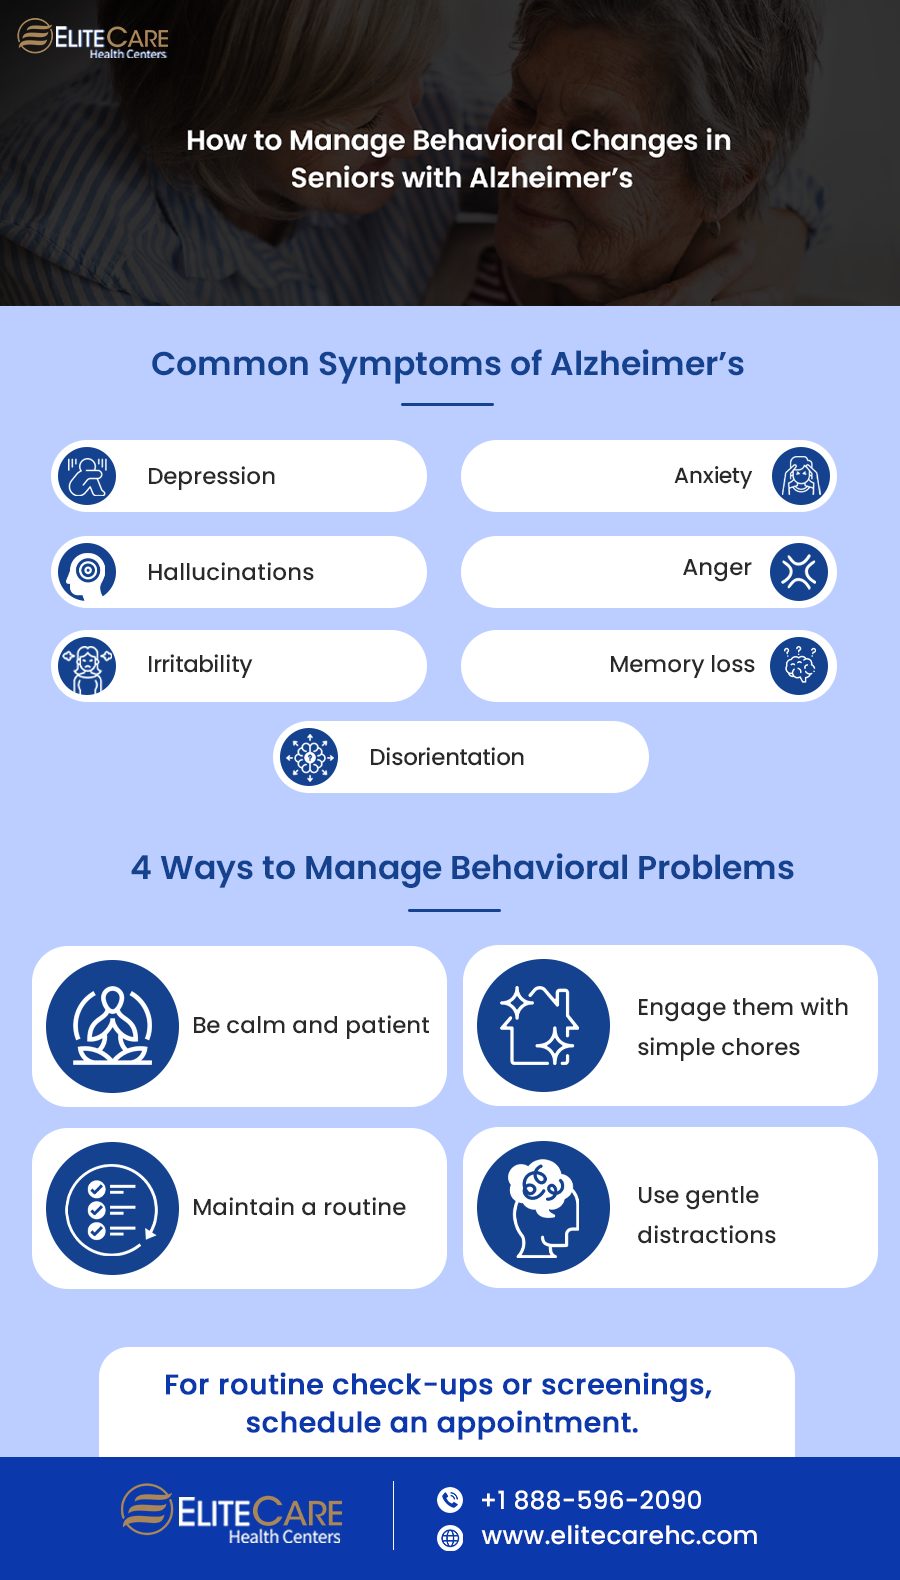 How to Manage Behavioral Changes in Seniors with Alzheimer’s | Infographic